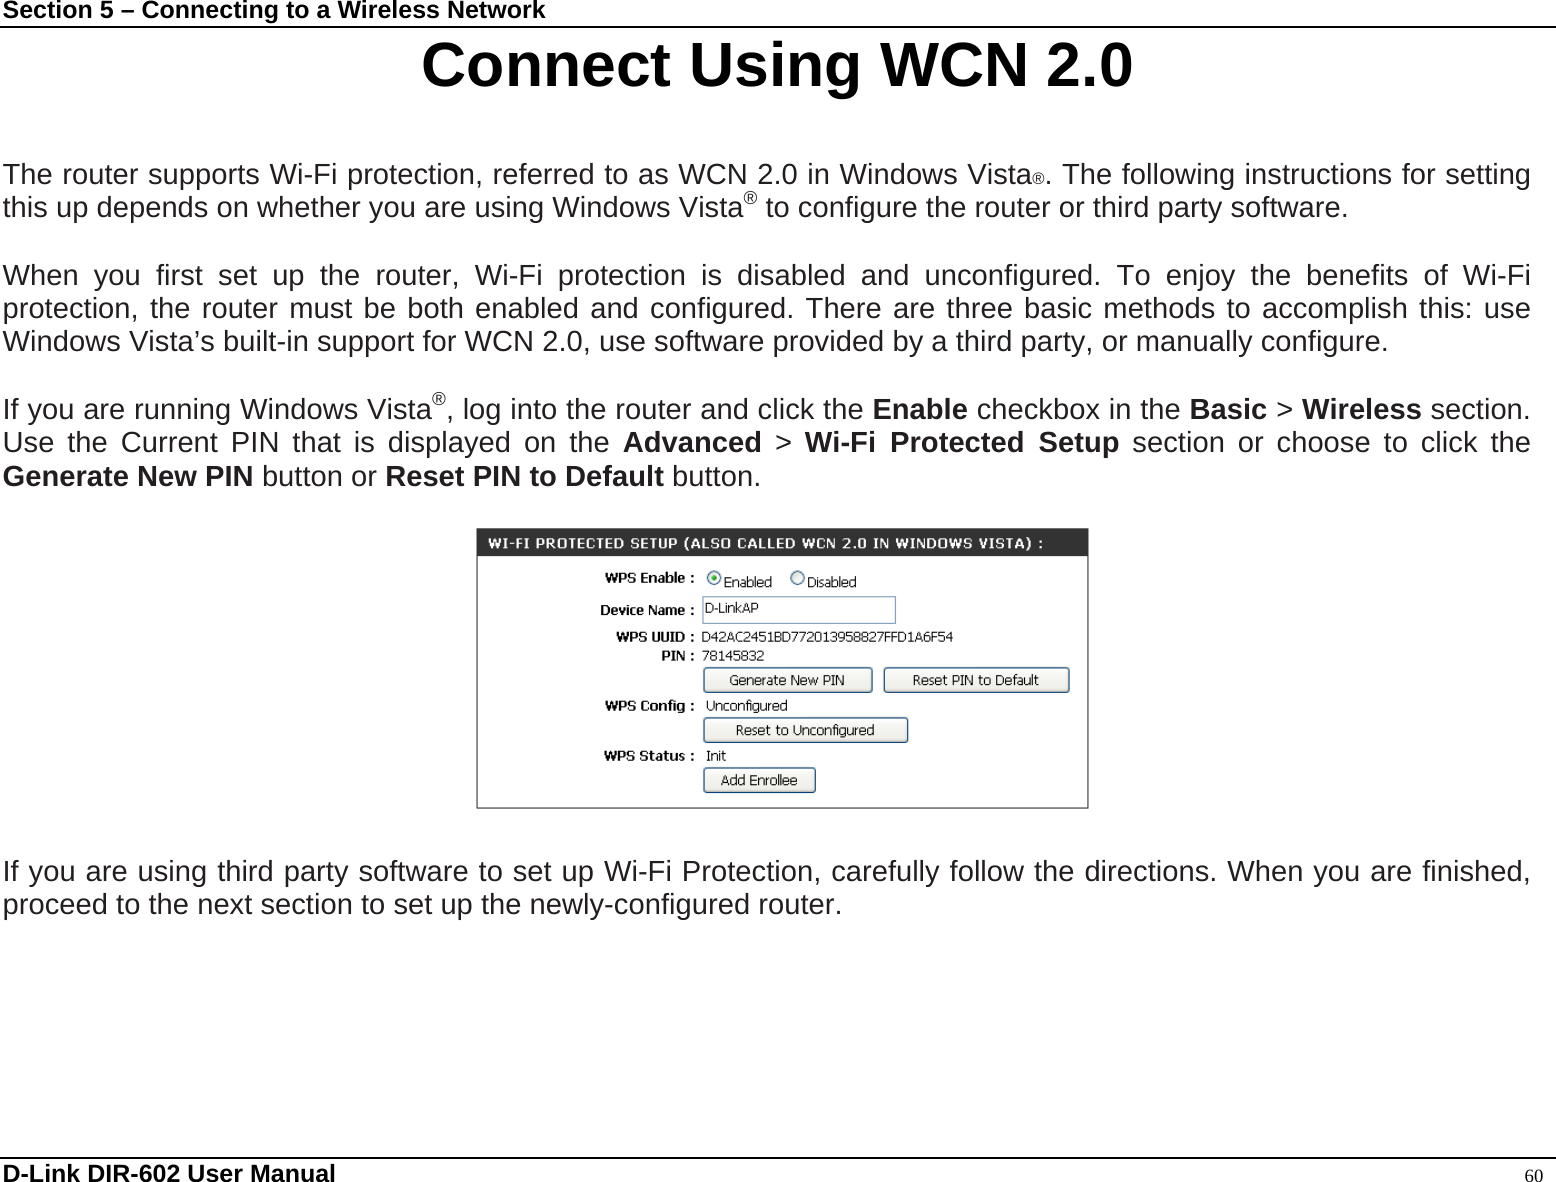 Section 5 – Connecting to a Wireless Network Connect Using WCN 2.0  The router supports Wi-Fi protection, referred to as WCN 2.0 in Windows Vista®. The following instructions for setting this up depends on whether you are using Windows Vista® to configure the router or third party software.          When you first set up the router, Wi-Fi protection is disabled and unconfigured. To enjoy the benefits of Wi-Fi protection, the router must be both enabled and configured. There are three basic methods to accomplish this: use Windows Vista’s built-in support for WCN 2.0, use software provided by a third party, or manually configure.    If you are running Windows Vista®, log into the router and click the Enable checkbox in the Basic &gt; Wireless section. Use the Current PIN that is displayed on the Advanced &gt; Wi-Fi Protected Setup section or choose to click the Generate New PIN button or Reset PIN to Default button.              If you are using third party software to set up Wi-Fi Protection, carefully follow the directions. When you are finished, proceed to the next section to set up the newly-configured router.    D-Link DIR-602 User Manual                                                                                               60 